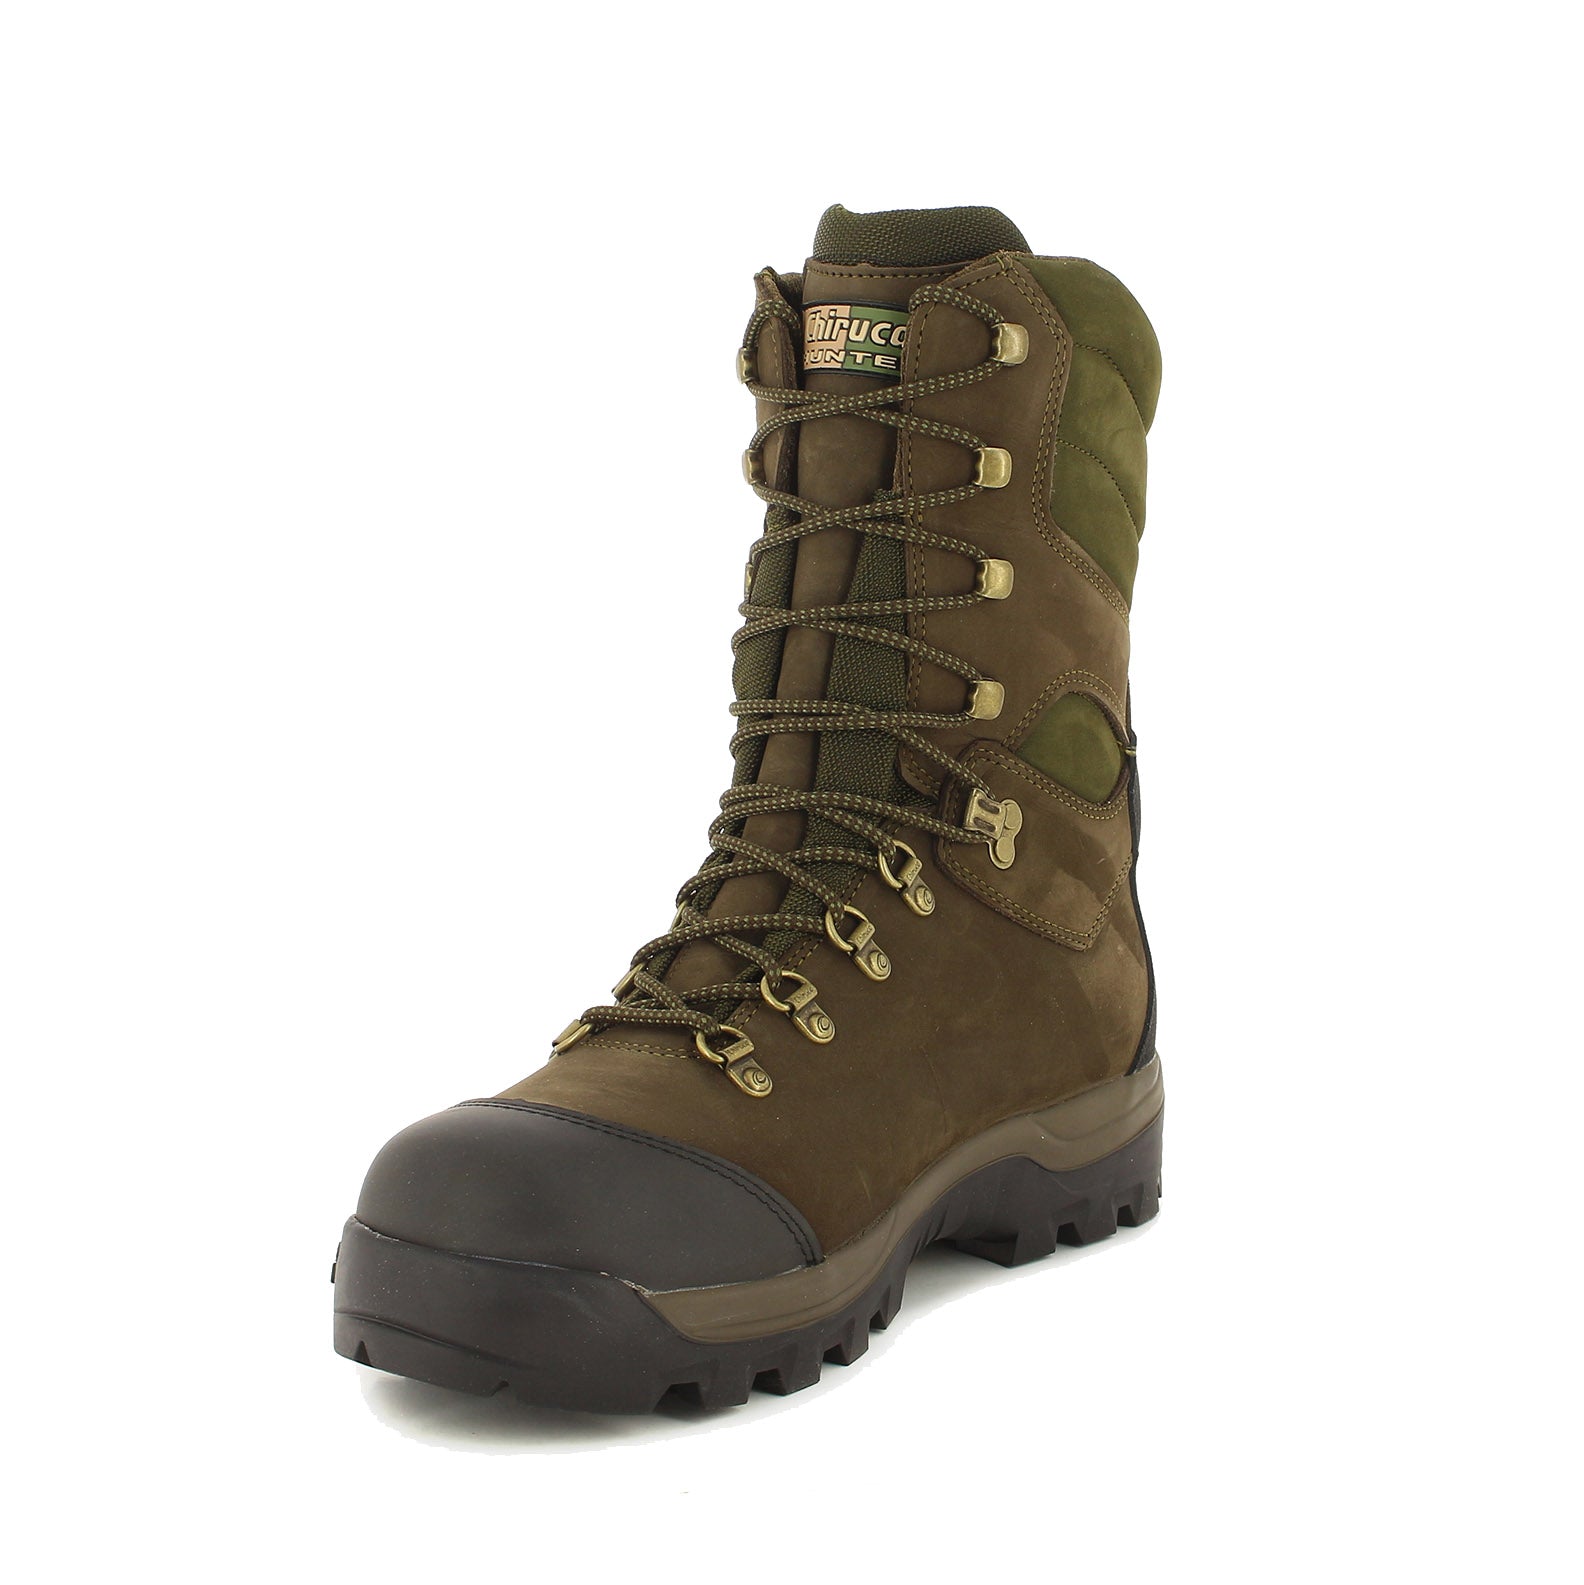 Alaska GORE-TEX Boots New Forest Clothing